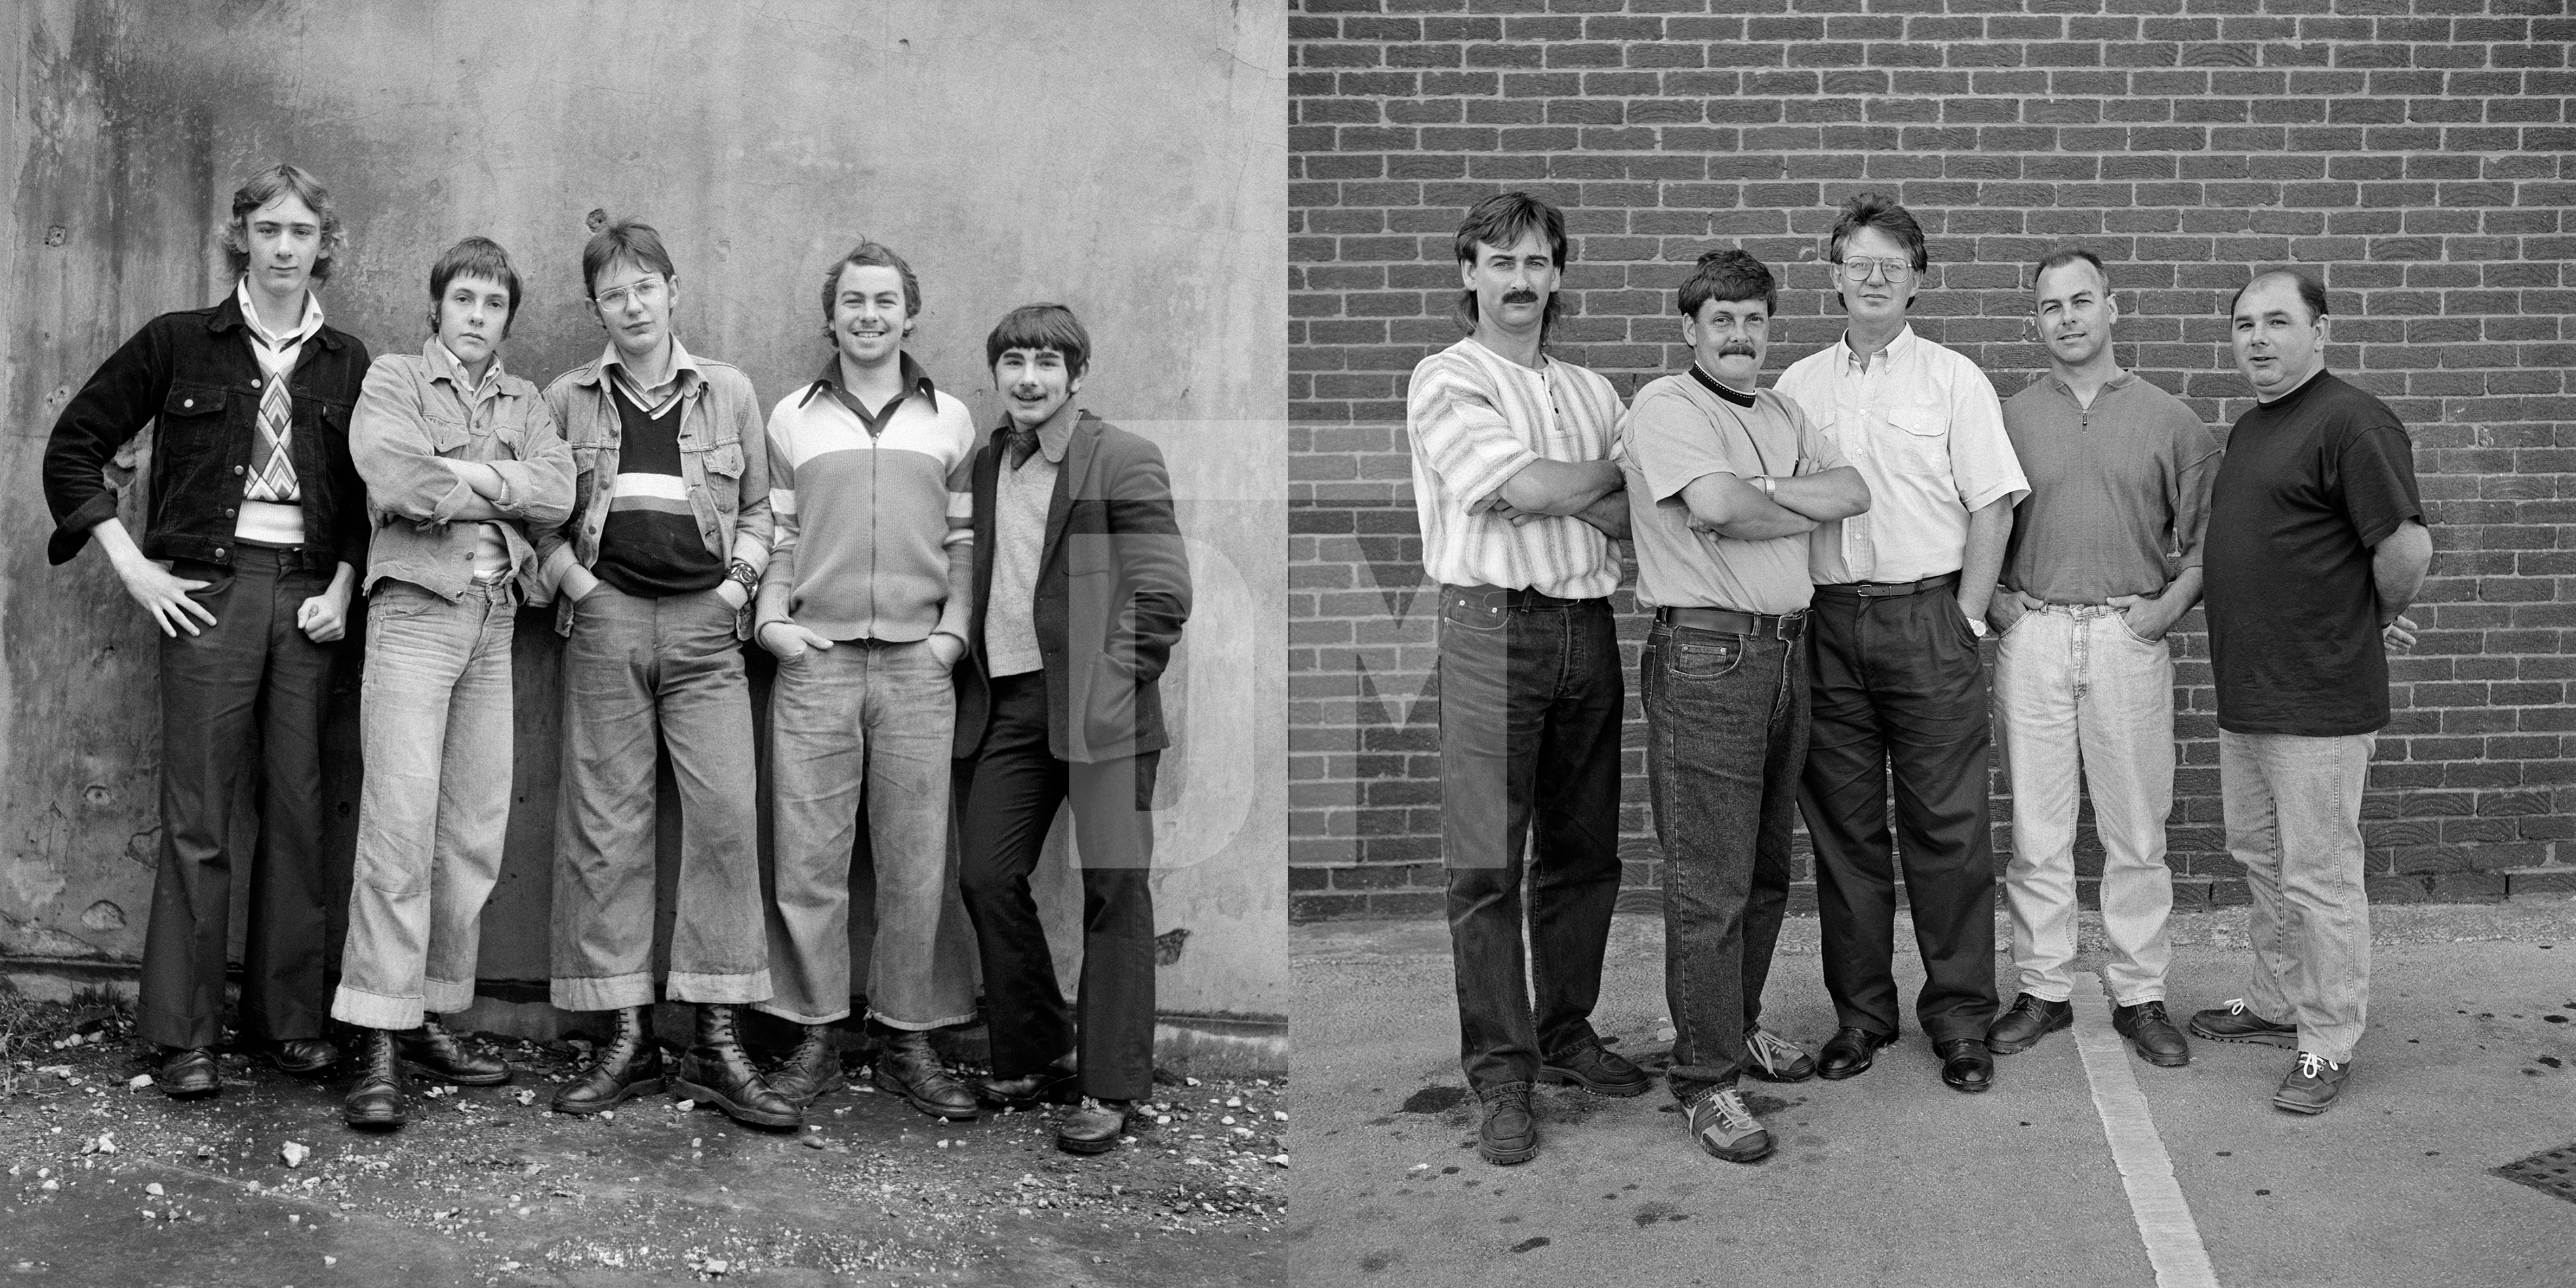 ‘Bootboys’: left-to-right Brian Morgan, Martin Tebay, Paul McMillan, Phil Tickle, Mike Comish. Barrow-in-Furness, Cumbria. 1974 and 1995 by Daniel Meadows